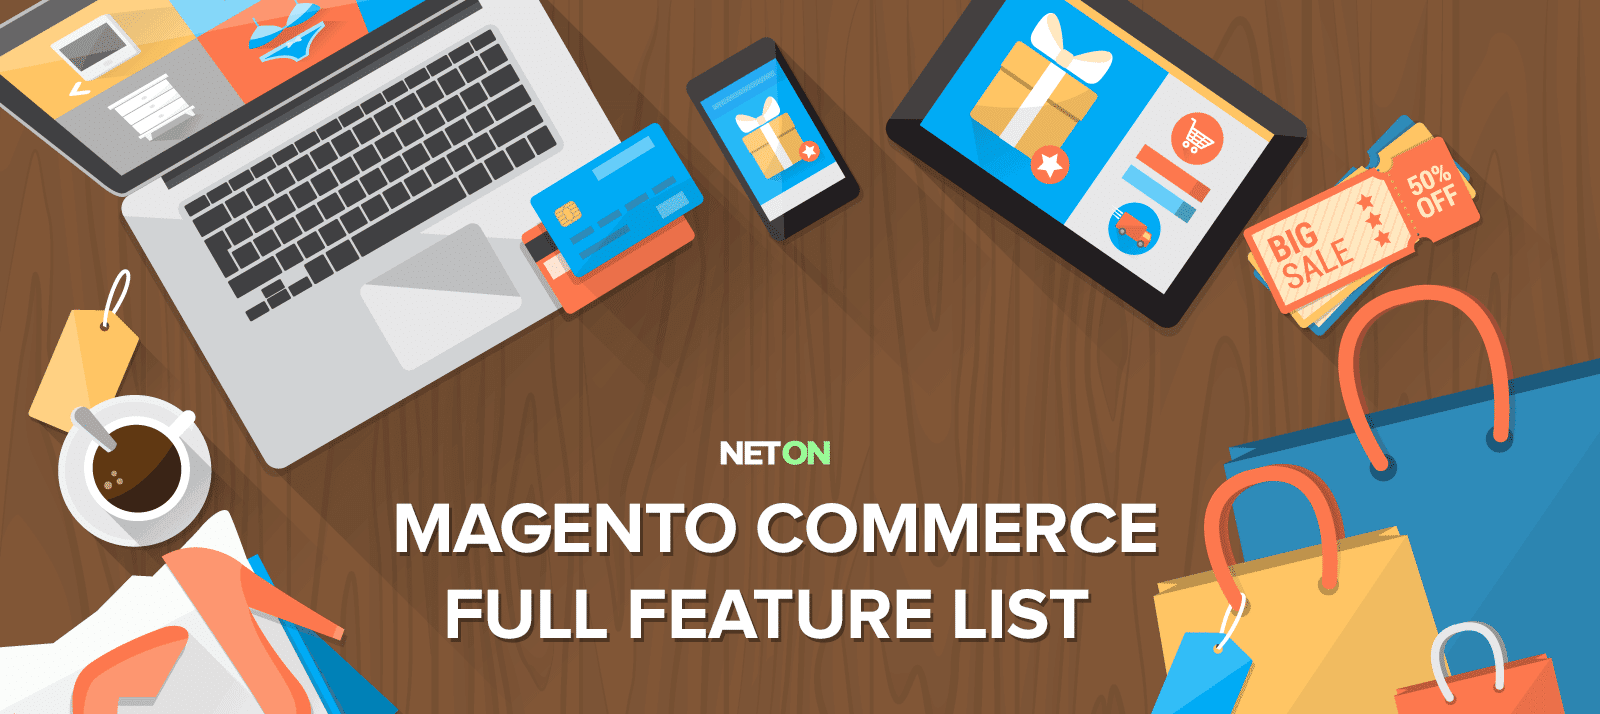 magento-features